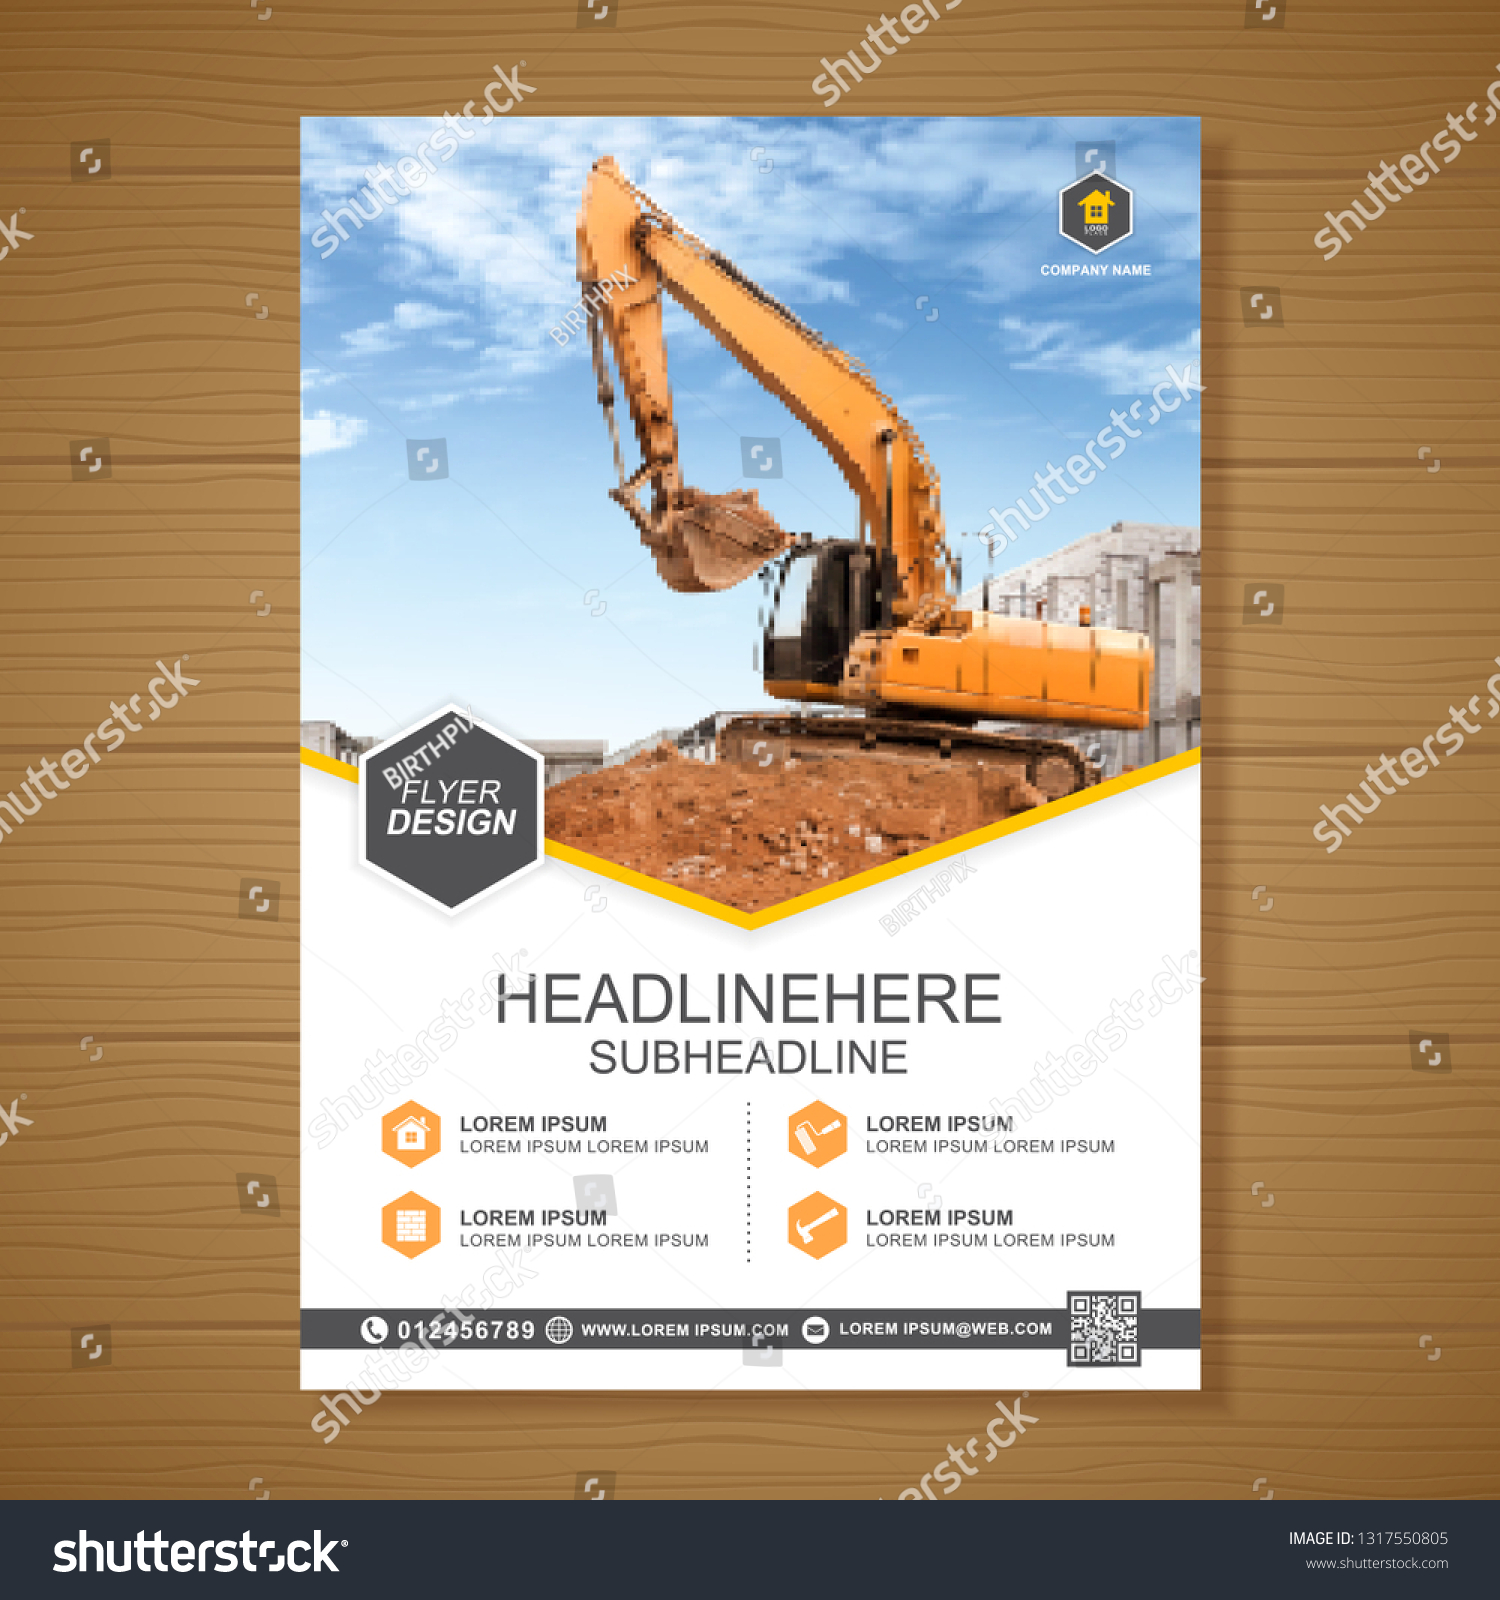 Download Excavator Dozer Cover A4 Template Construction Stock Vector Royalty Free 1317550805